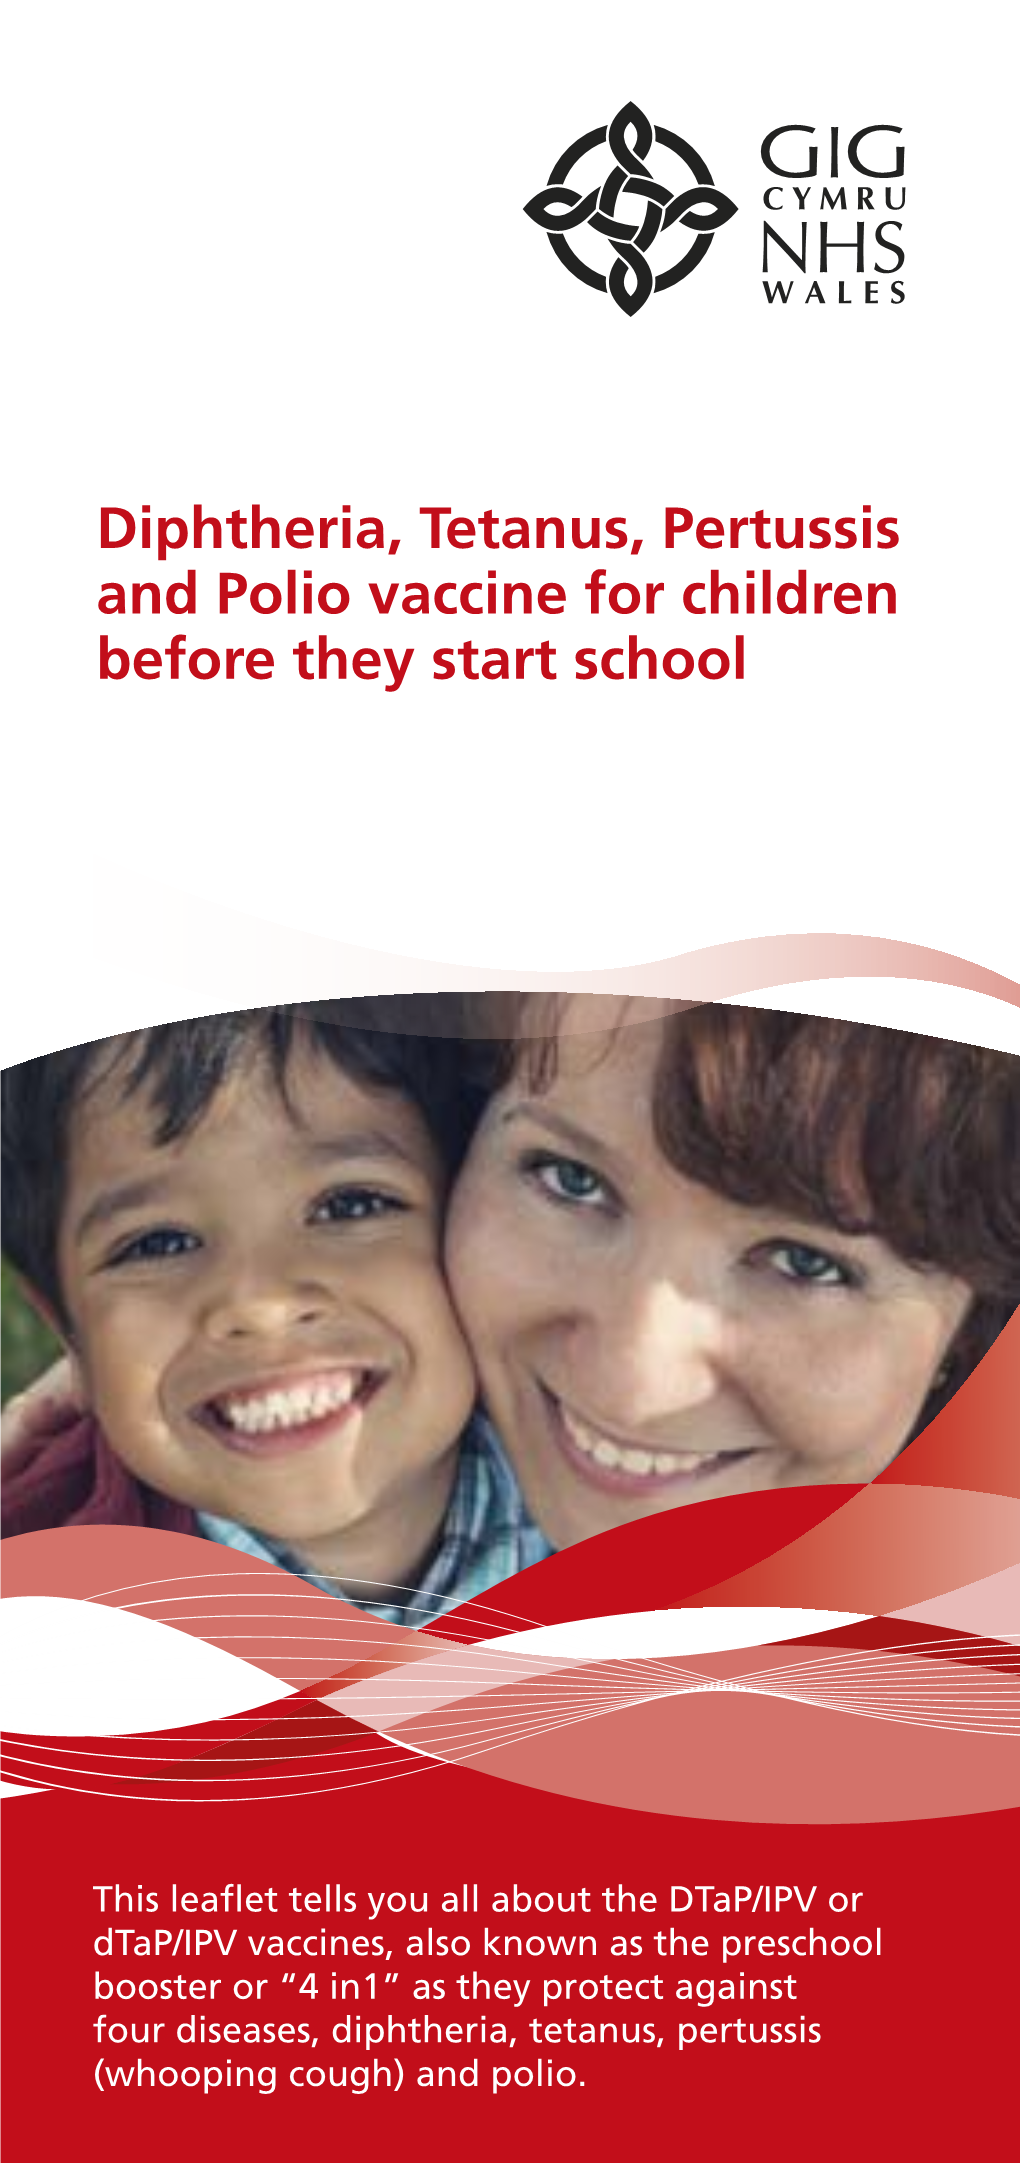 Diphtheria, Tetanus, Pertussis and Polio Vaccine for Children Before They Start School